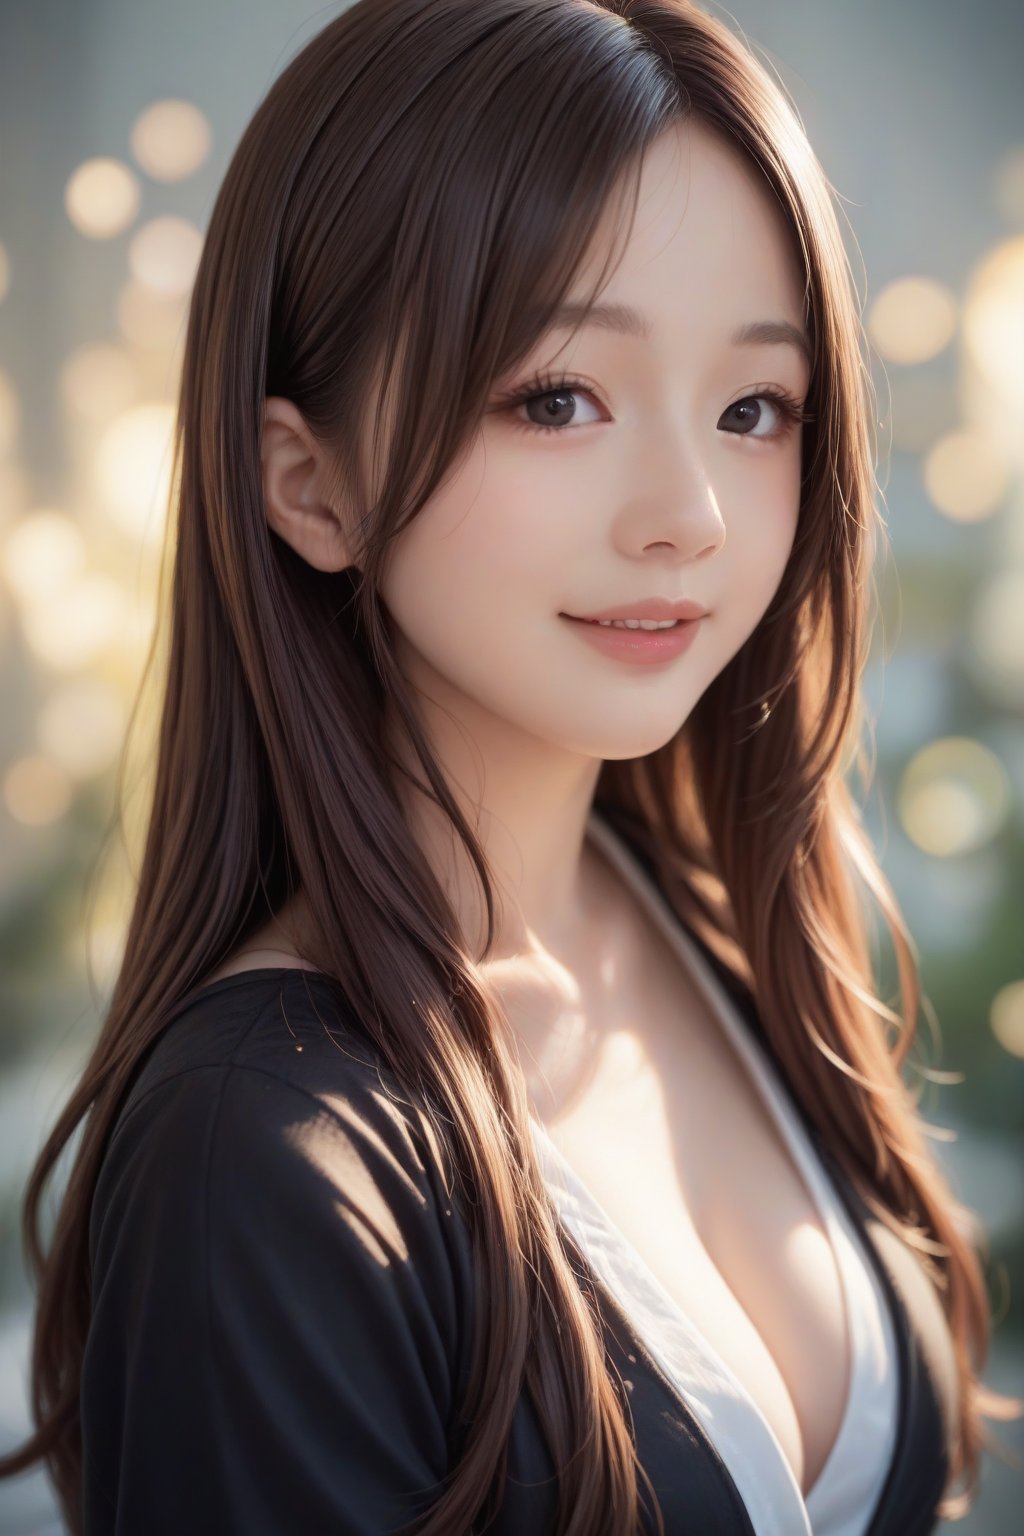 score_9, score_8_up, score_7_up, masterpiece, best quality, 
BREAK
1girl, solo, Japanese girl, Beauty, beautiful eyes, long eyelashes, black eyes, smile, long hair, brown hair, upper body, black eyes, lips, realistic, out of focus foreground and background, depth of field, soft bokeh, soft lighting bathes the body and face, 
